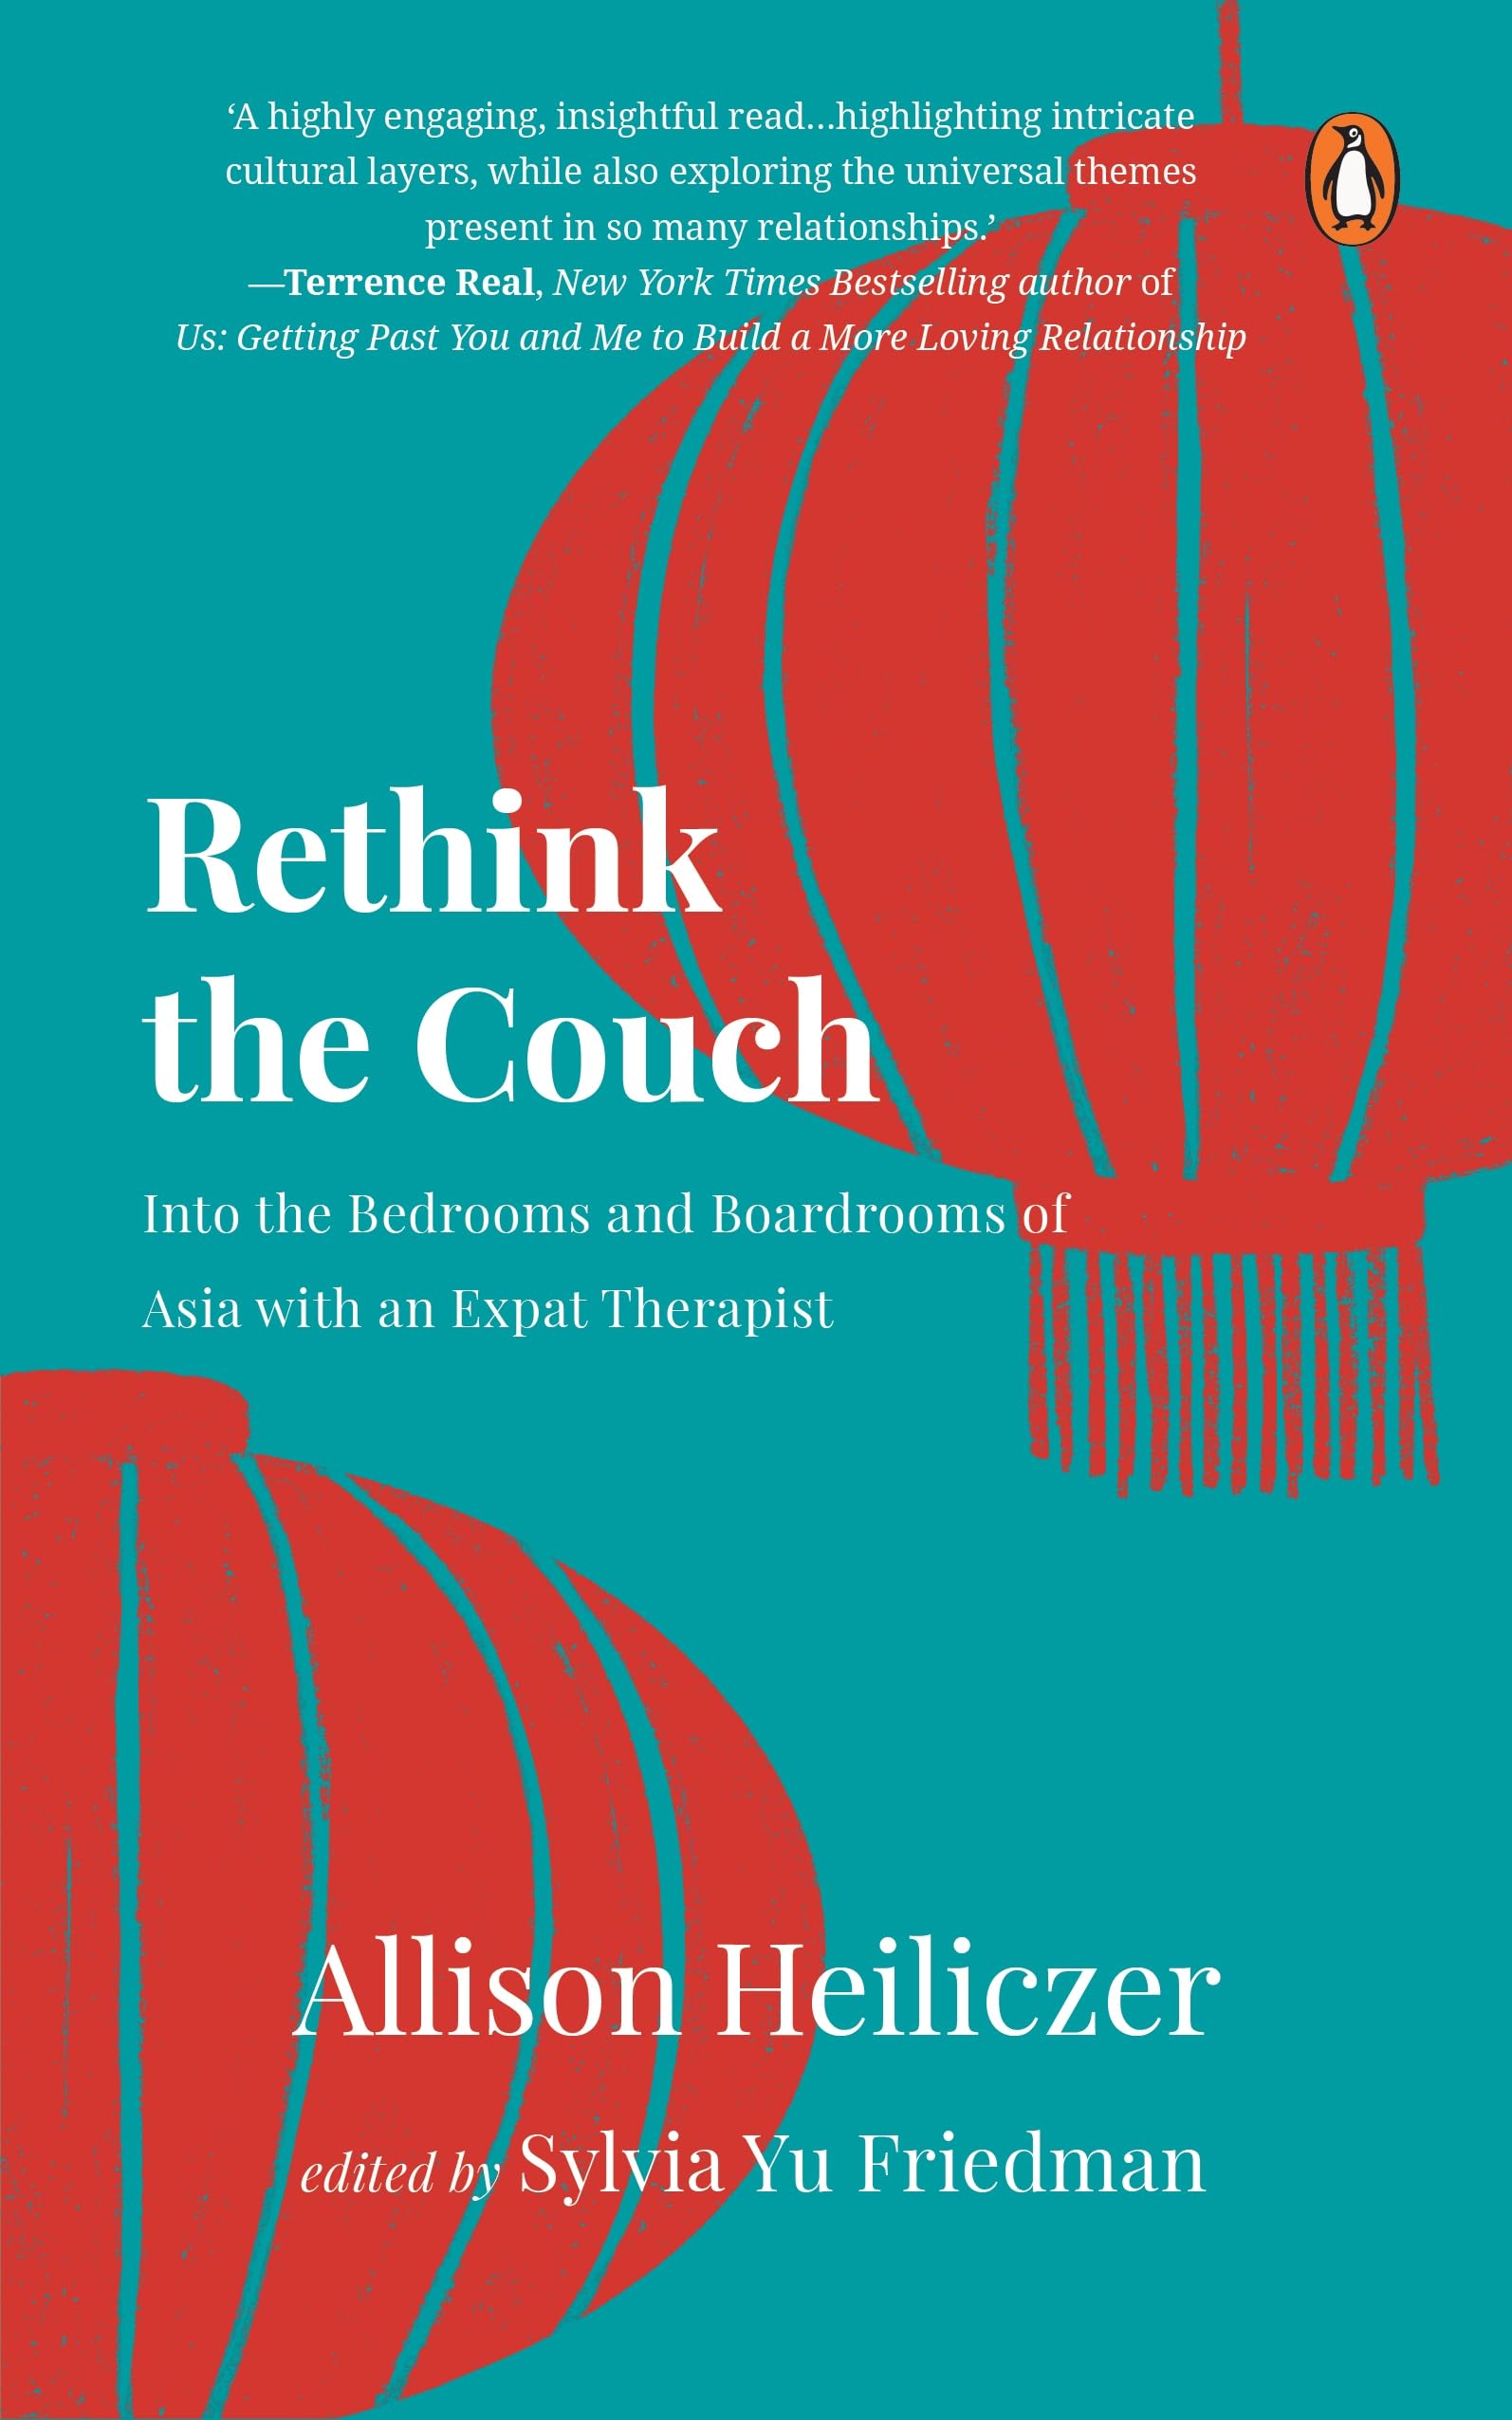 Rethink the Couch: Into the Bedrooms and Boardrooms of Asia with an Expat Therapist